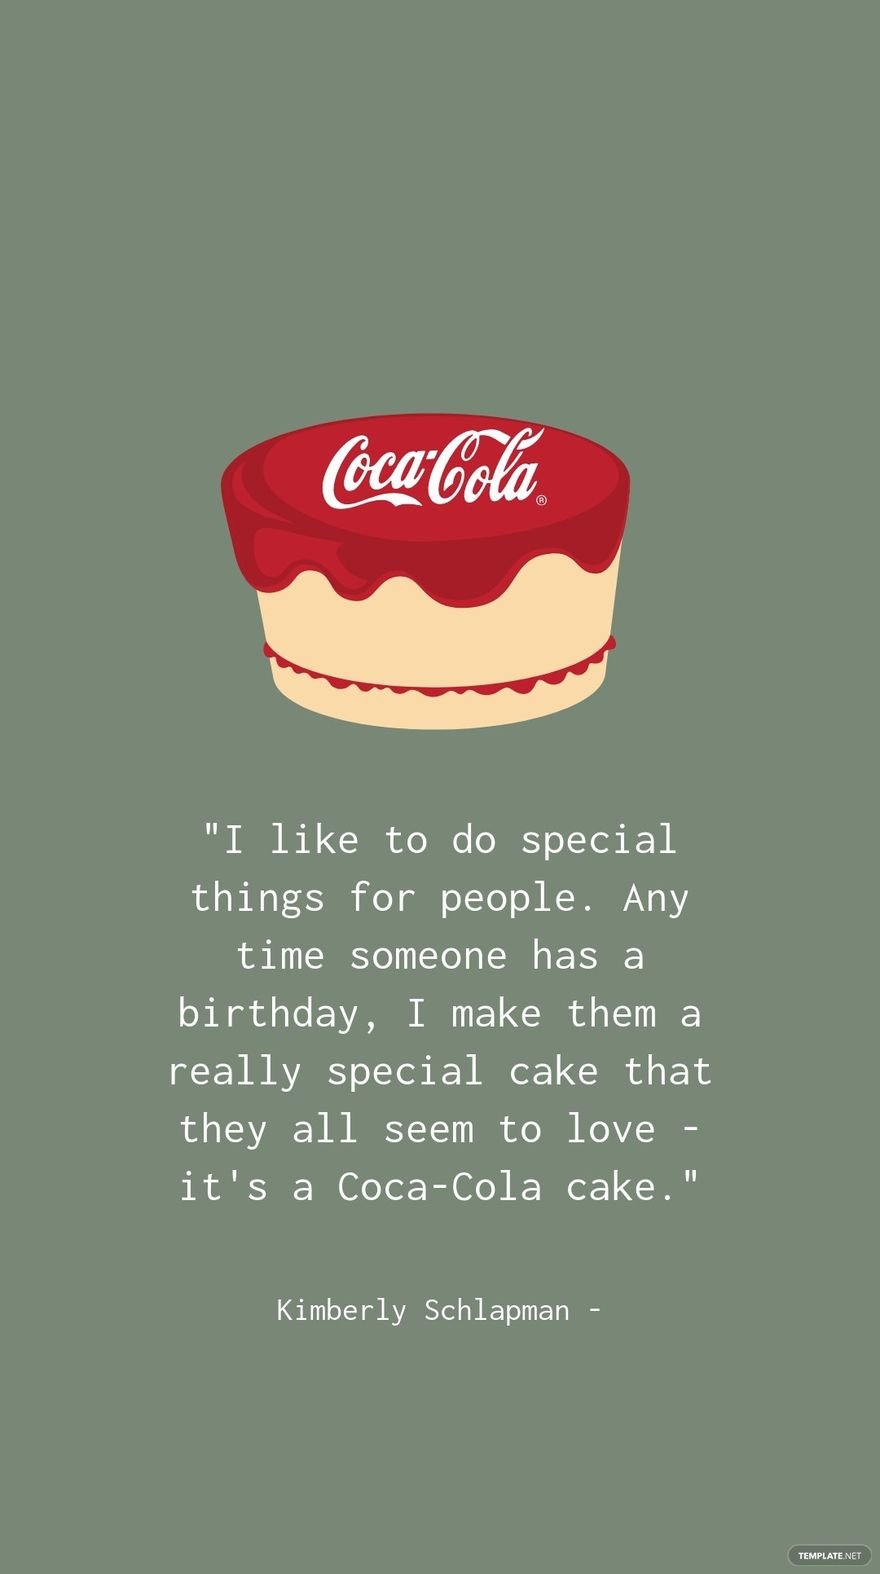 Kimberly Schlapman - I like to do special things for people. Any time someone has a birthday, I make them a really special cake that they all seem to love - it's a Coca-Cola cake.